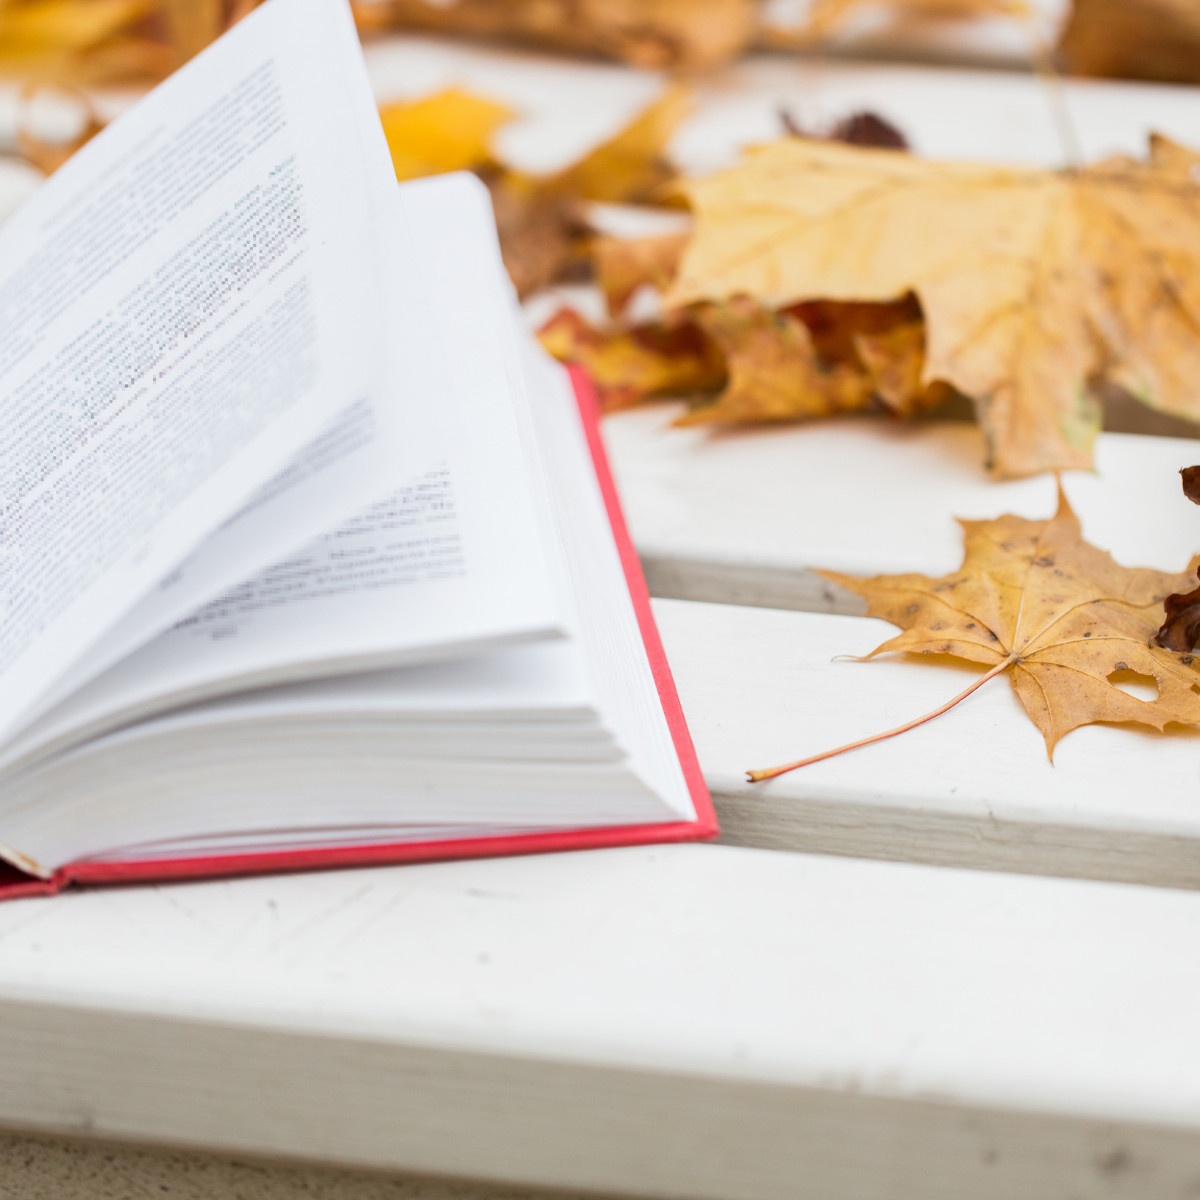 Best Books for Fall